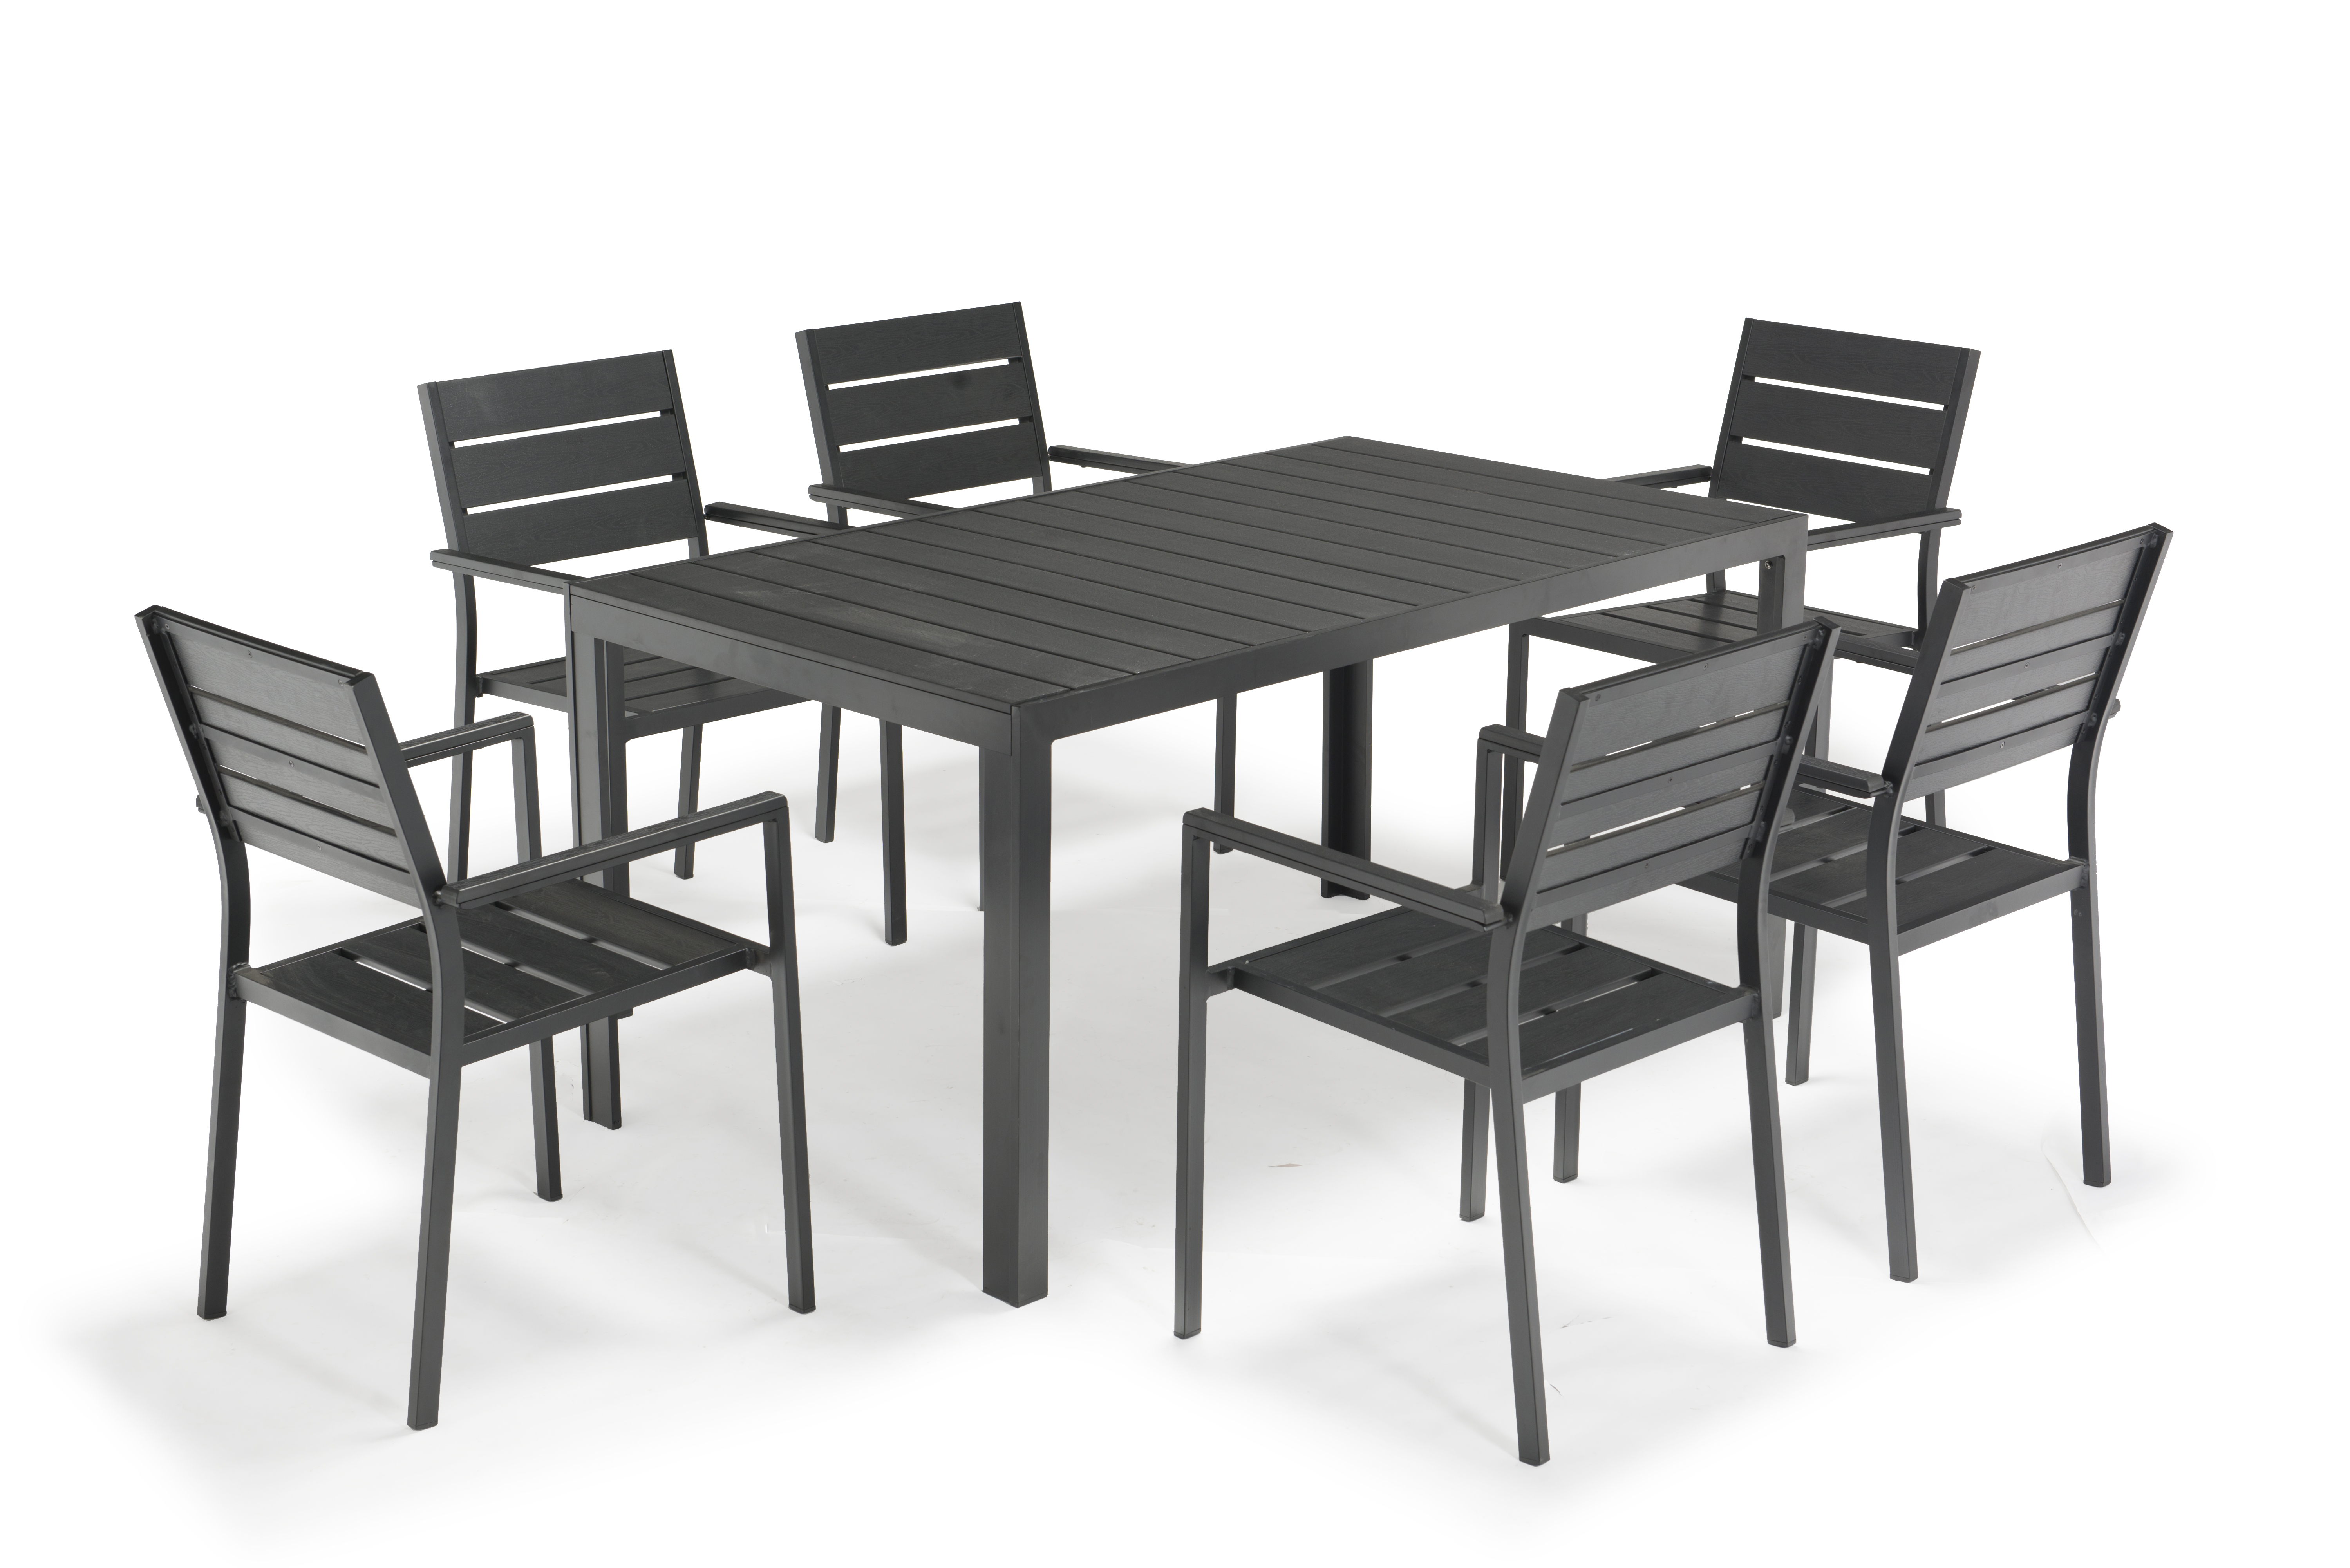 The proportion of outdoor plastic wood furniture